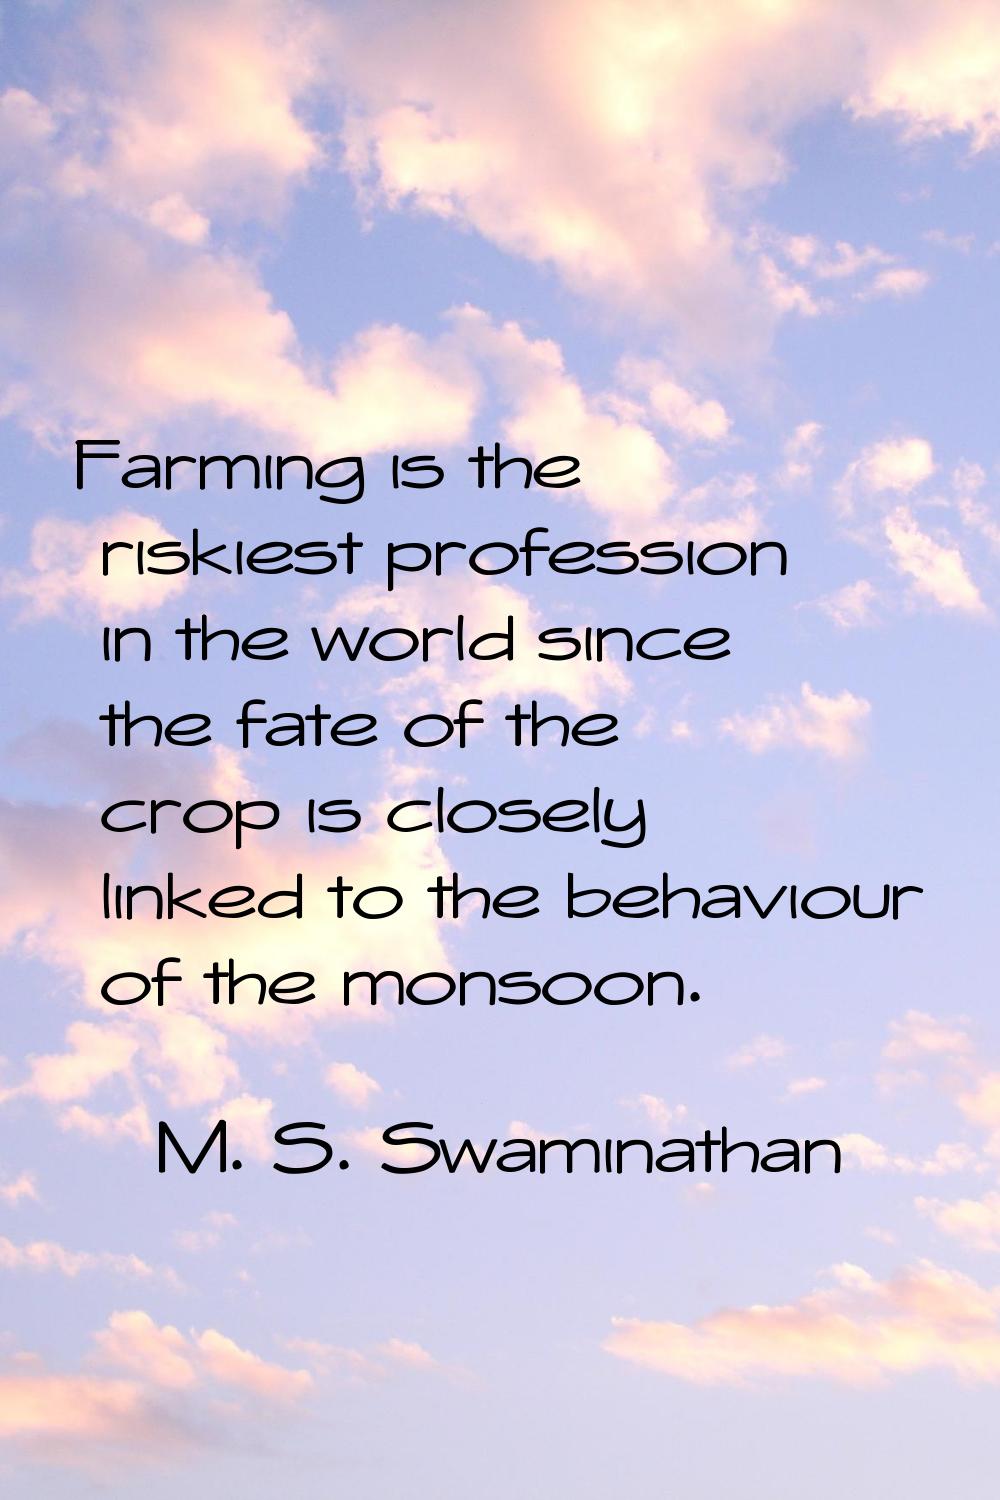 Farming is the riskiest profession in the world since the fate of the crop is closely linked to the